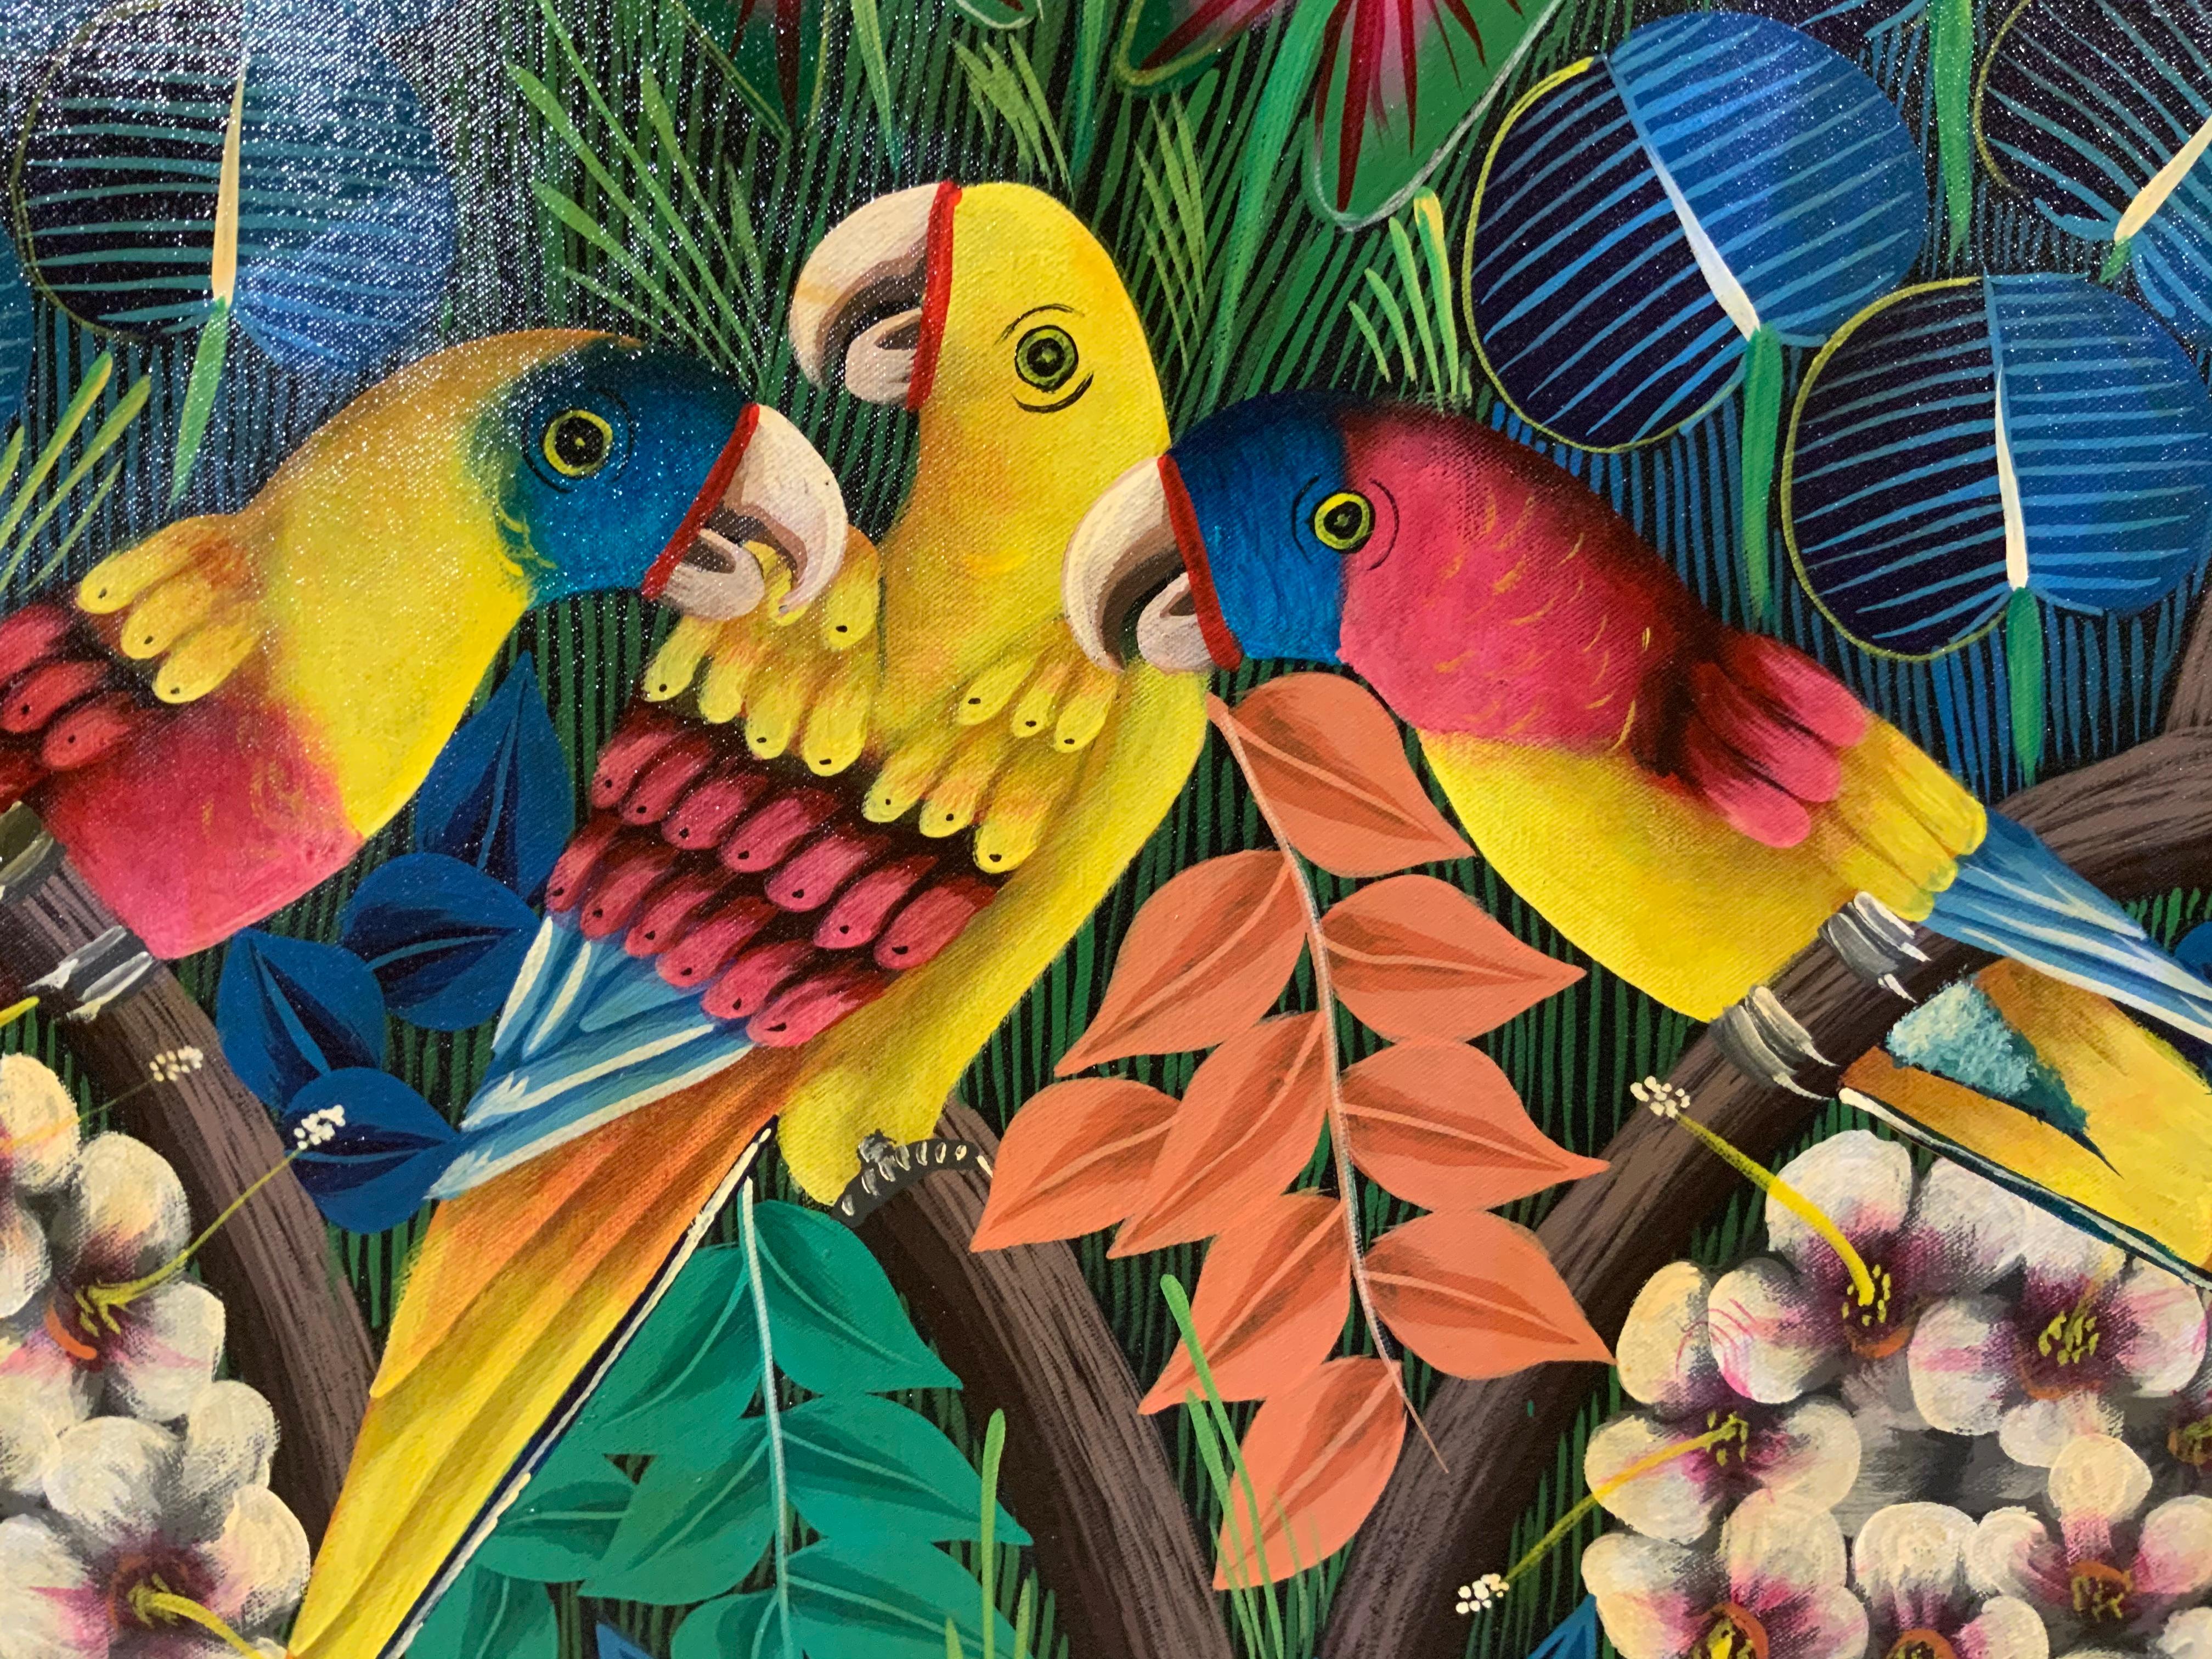 Large Parrots in the Jungle, Haitian Acrylic Painting on Canvas 7